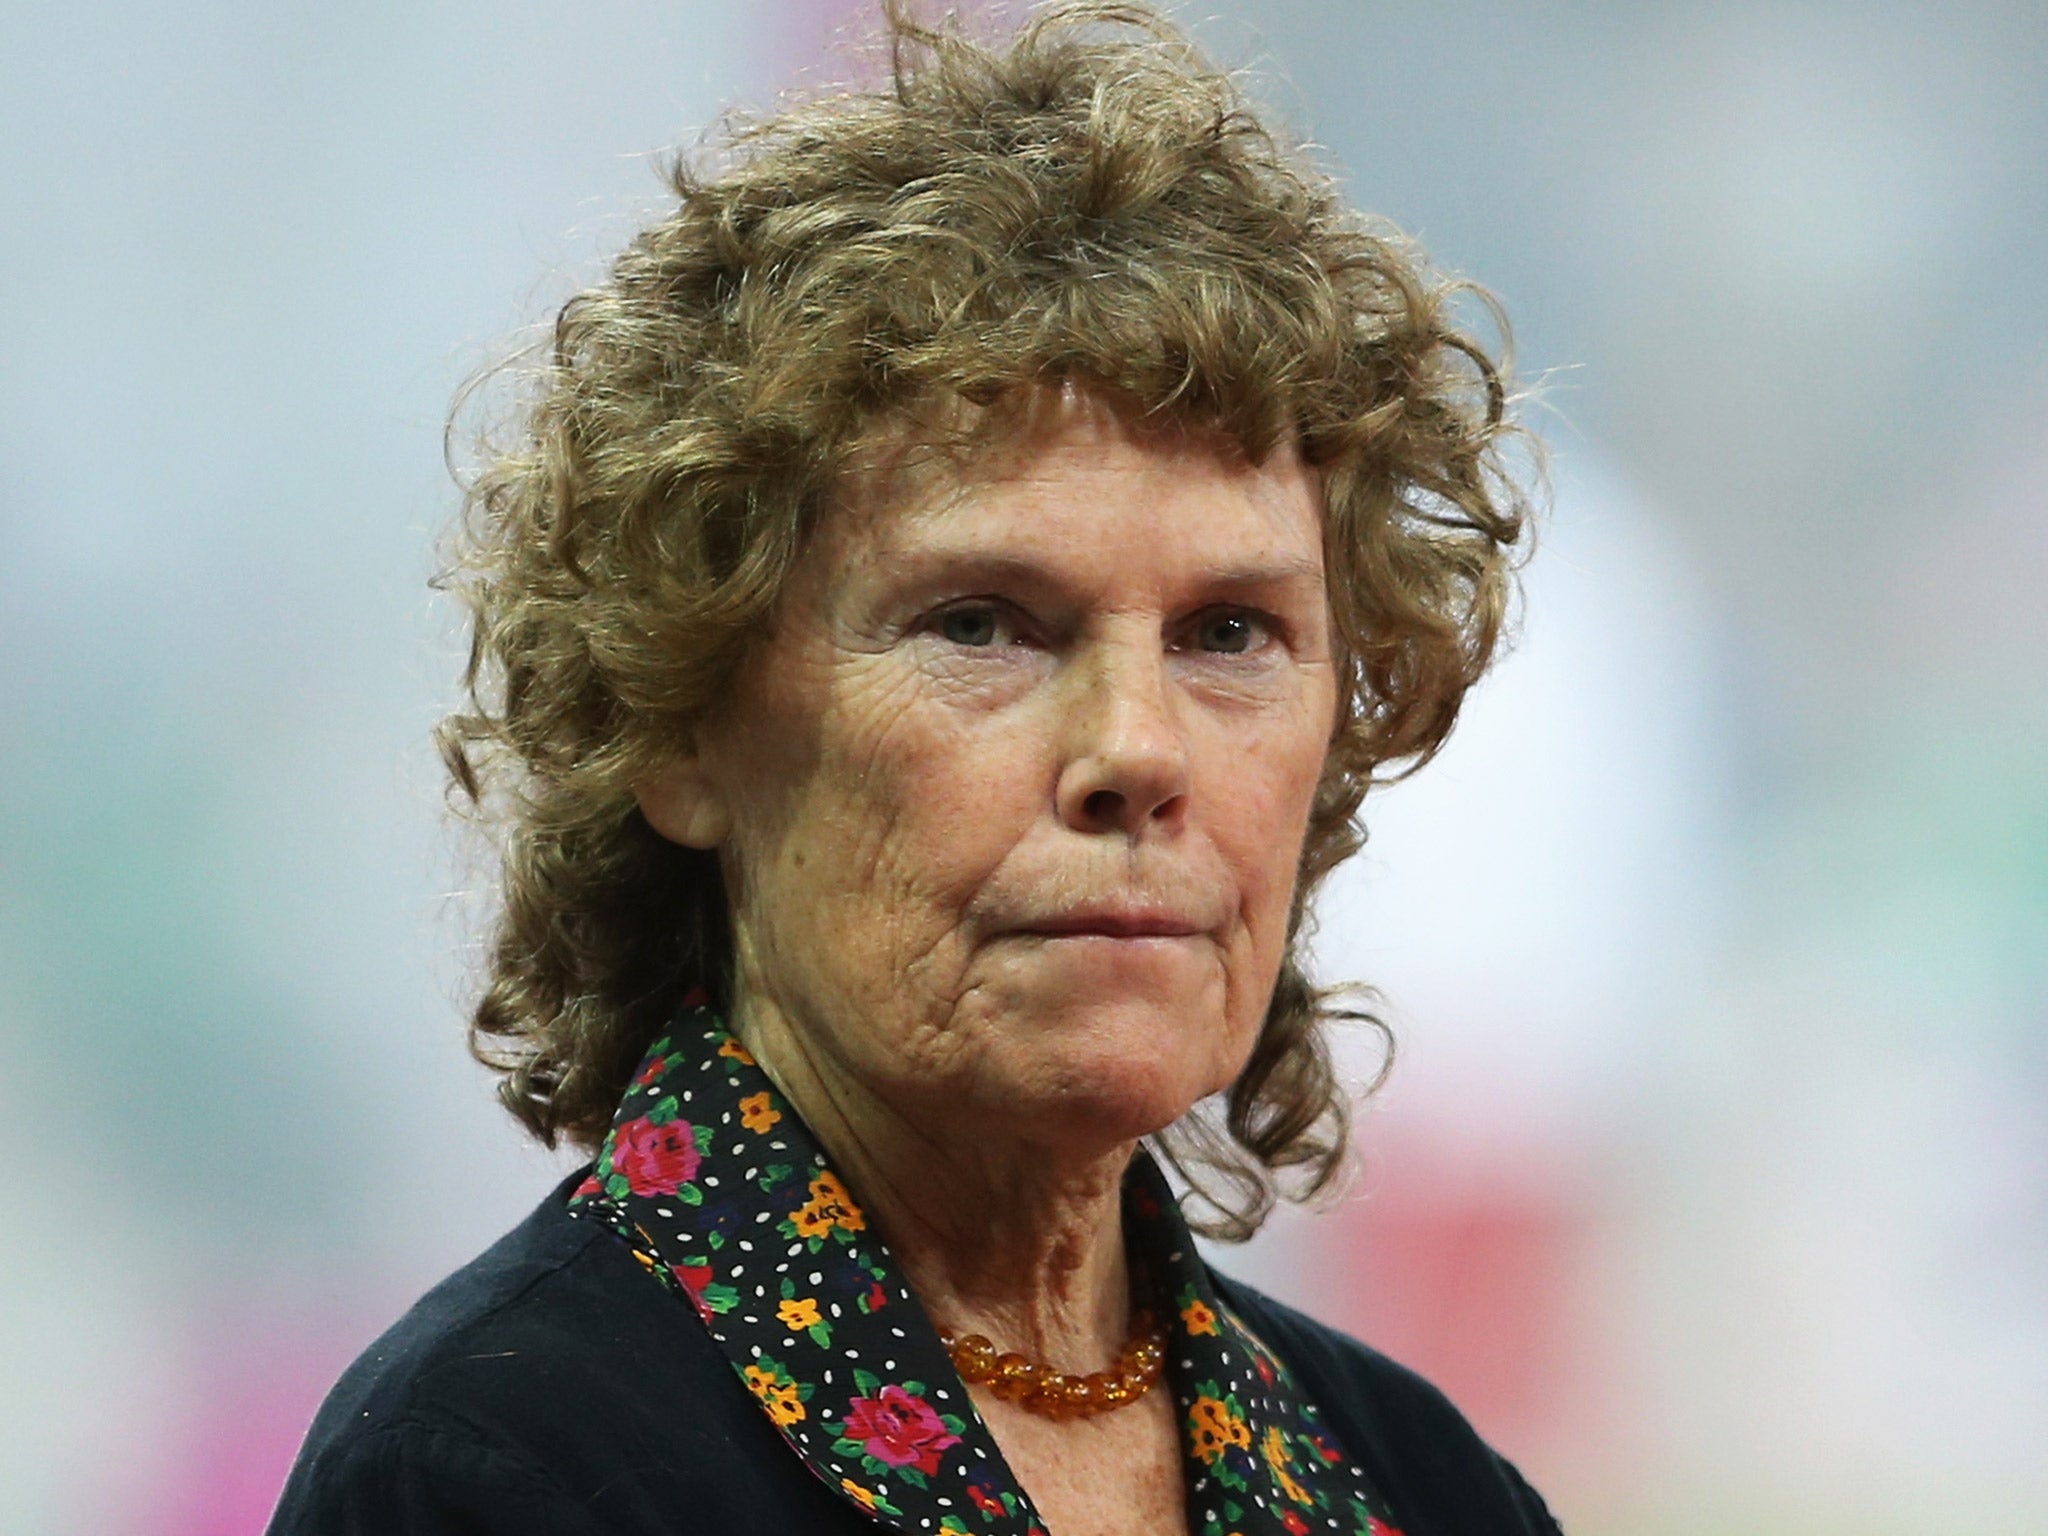 Kate Hoey, a former minister under Tony Blair, is co-chairing the Labour for Britain group